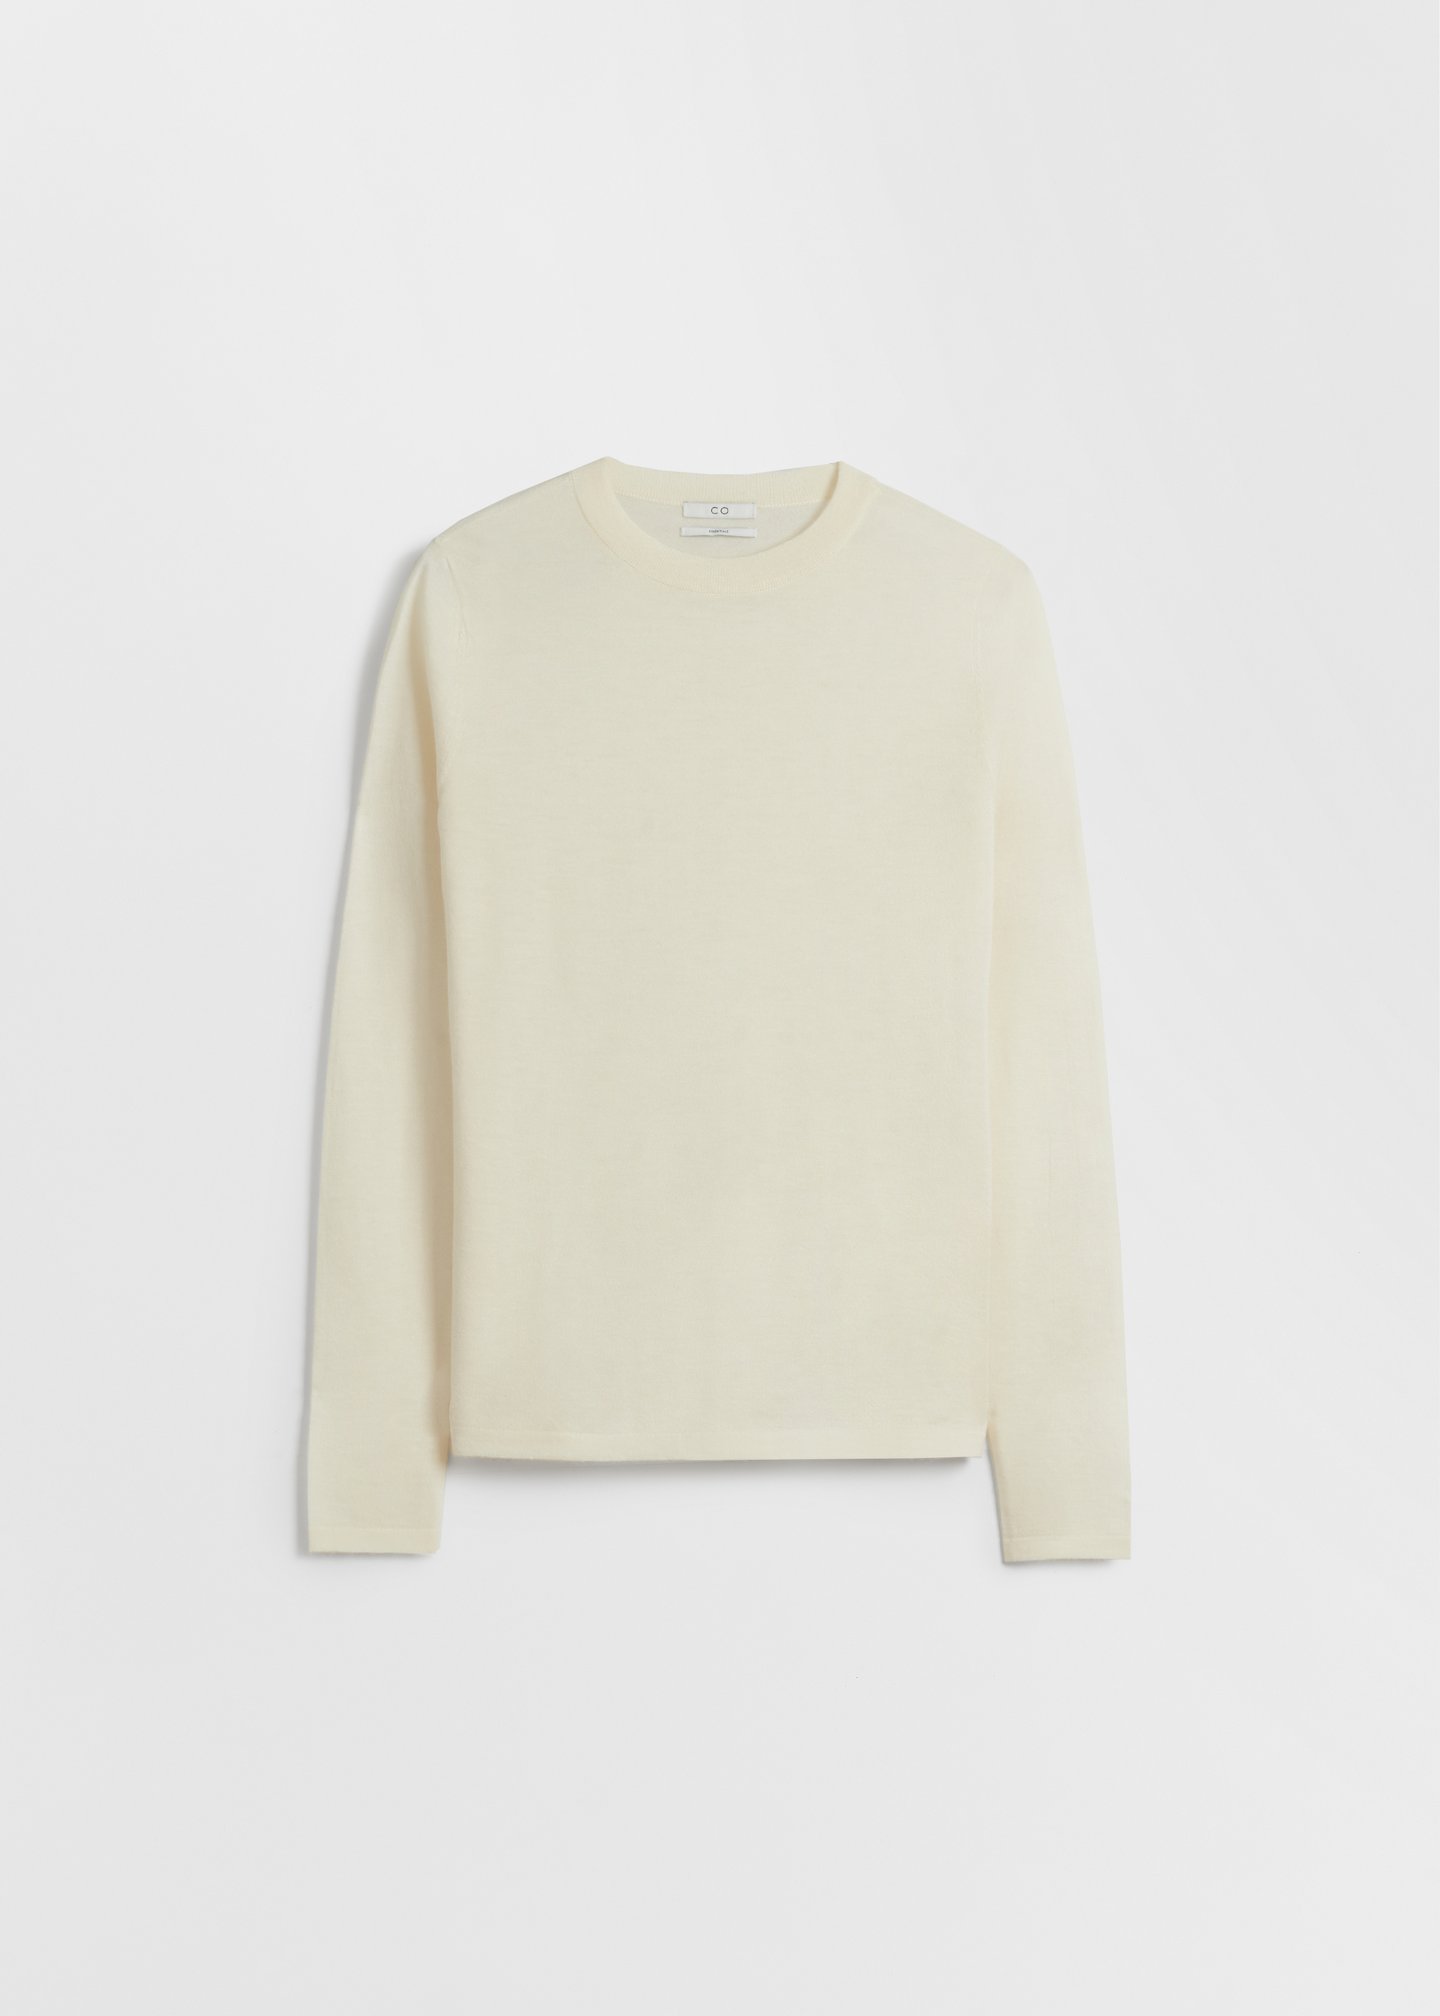 CO - Long Sleeve Crew Neck in Fine Cashmere - Ivory